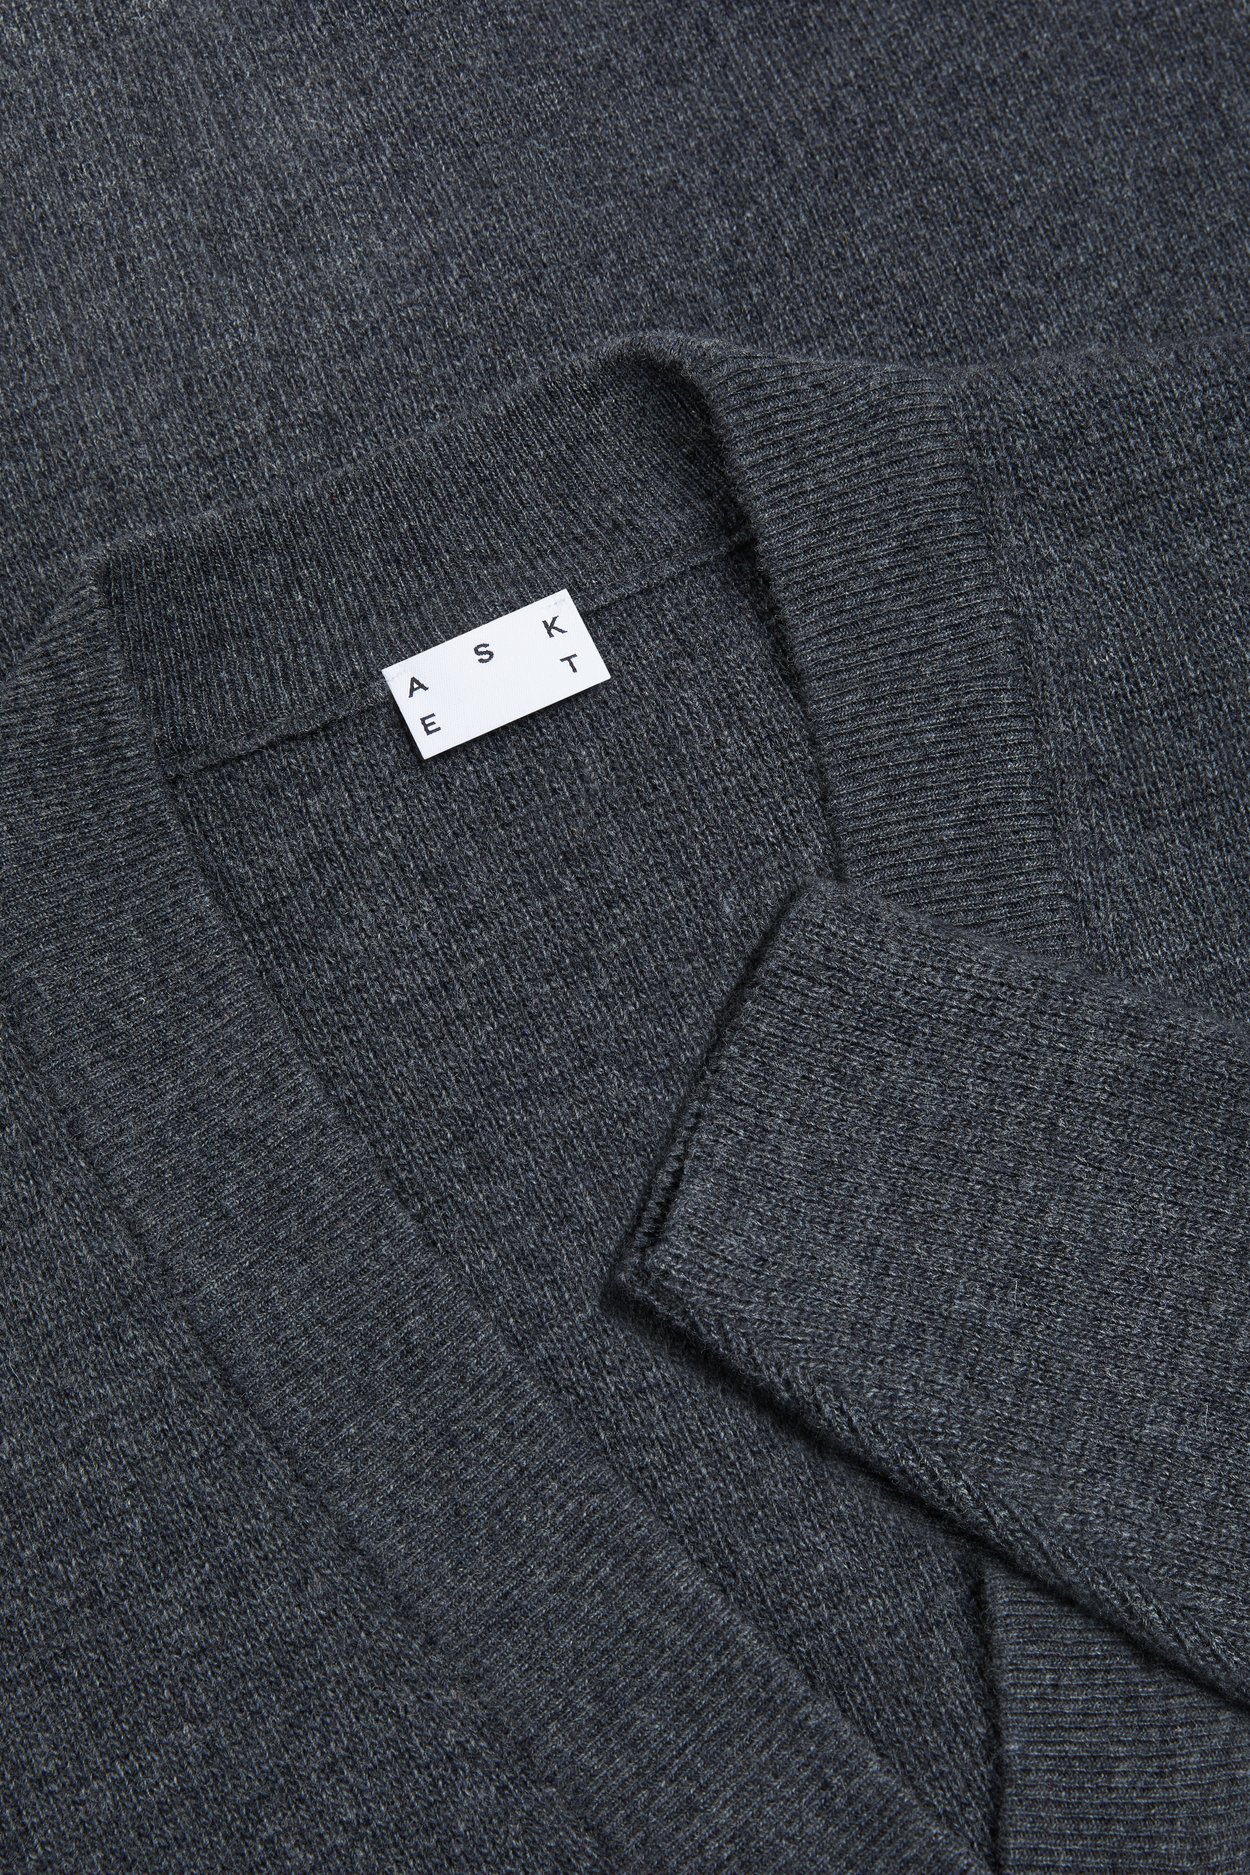 One of the most dependable wardrobe essentials, made from 100% recycled wool